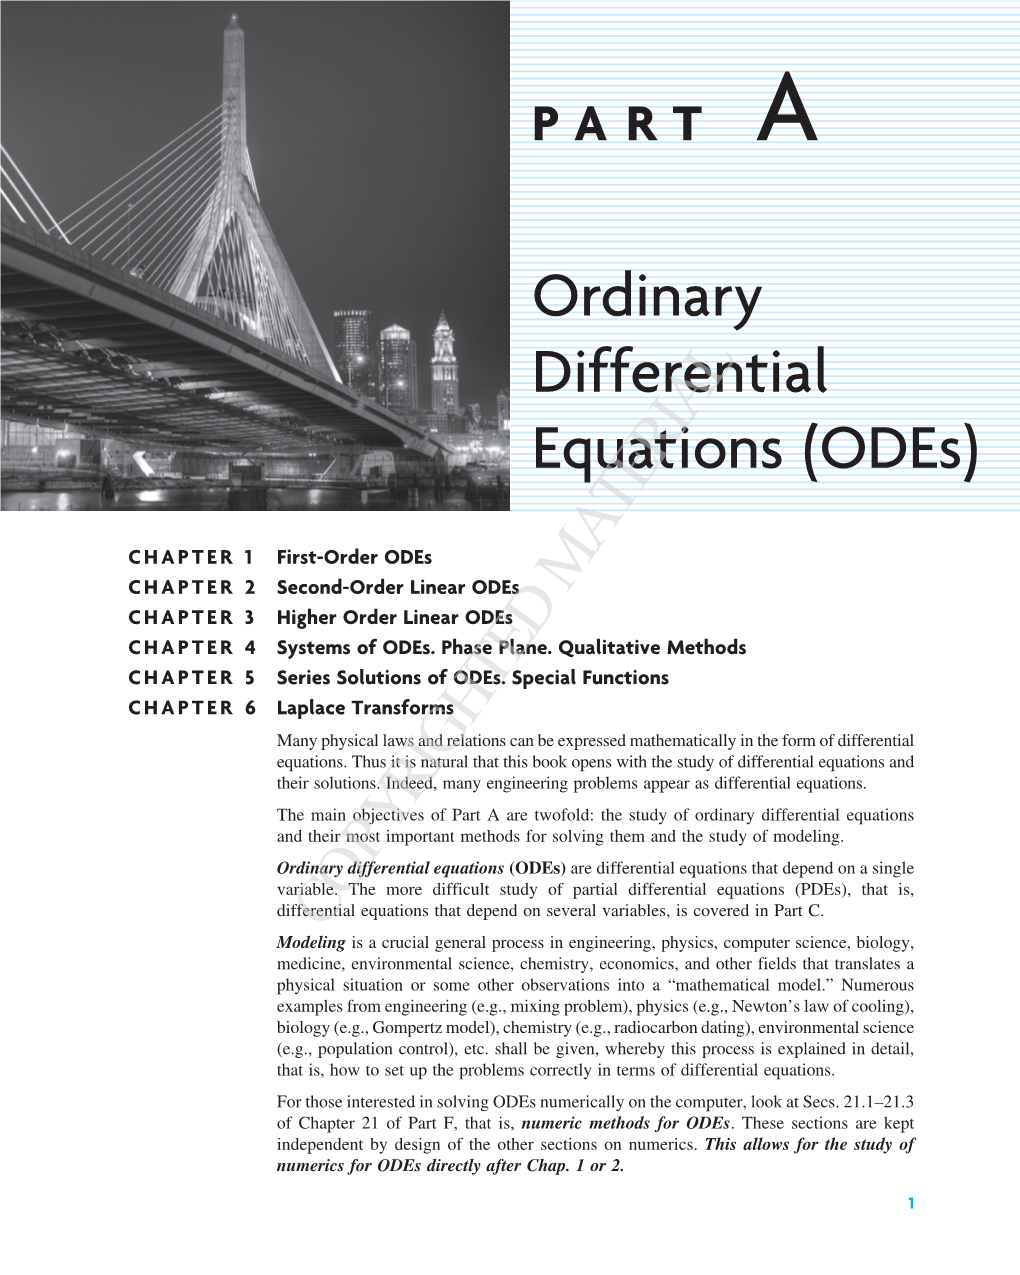 Ordinary Differential Equations (Odes)